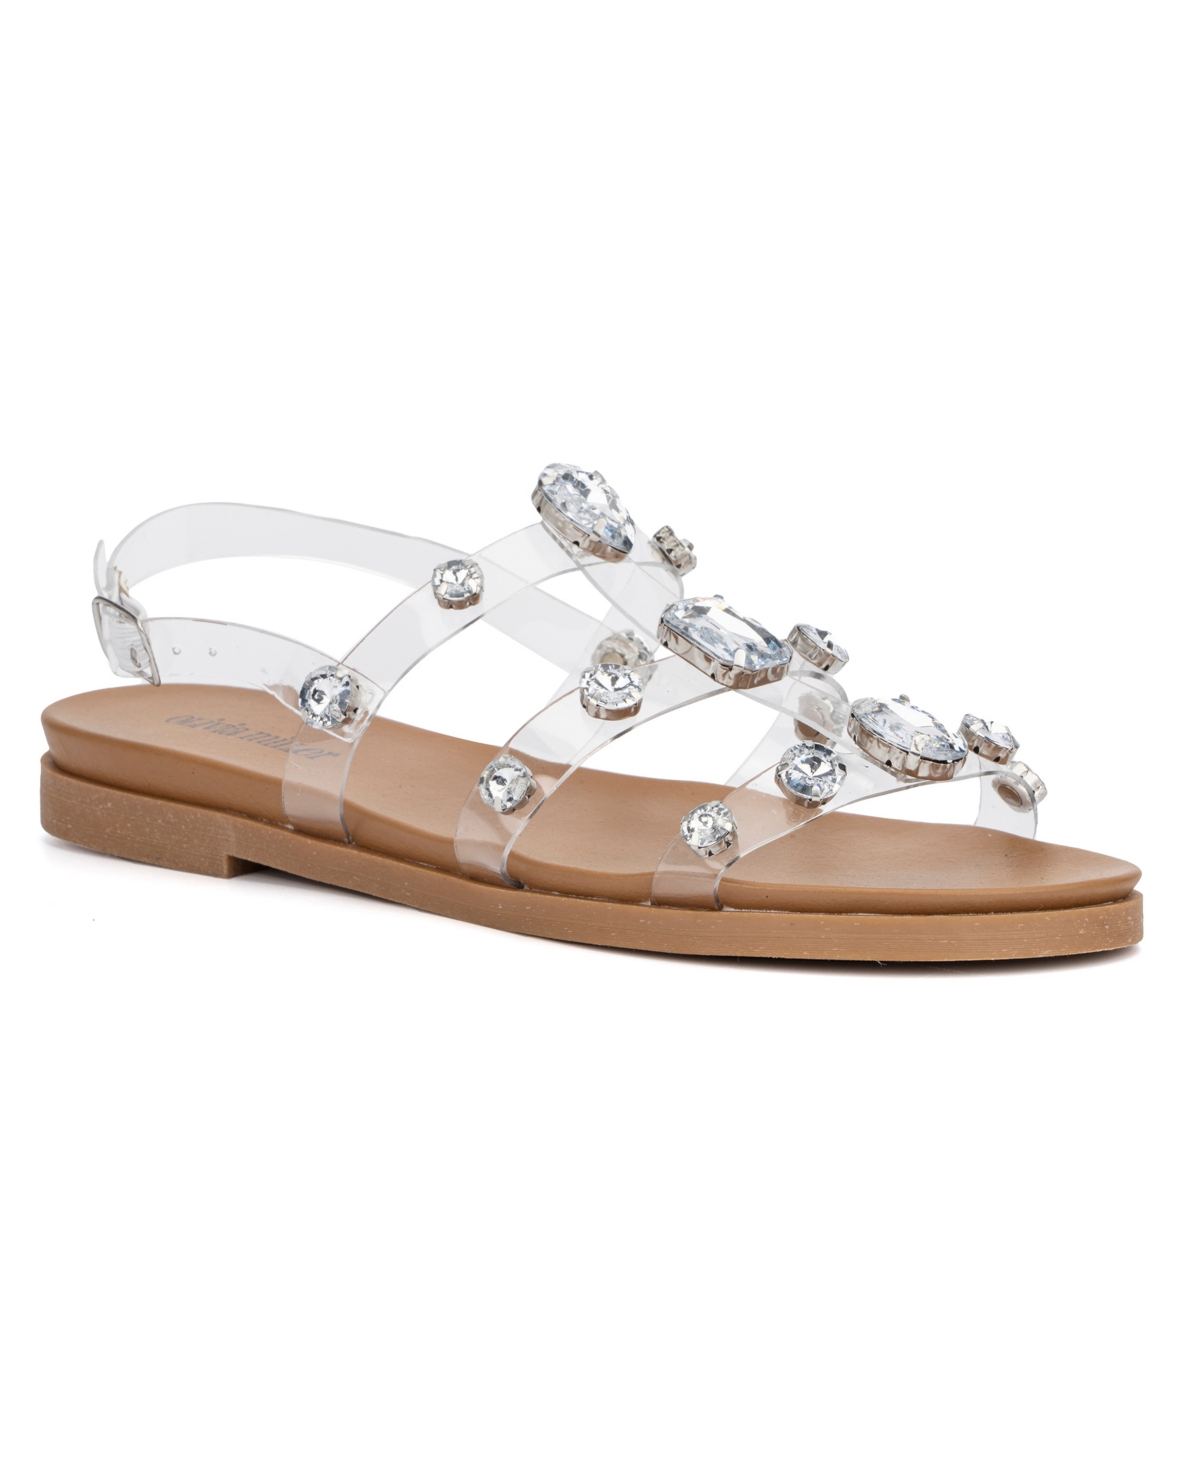 Women's Crystal Clear Sandals - Clear